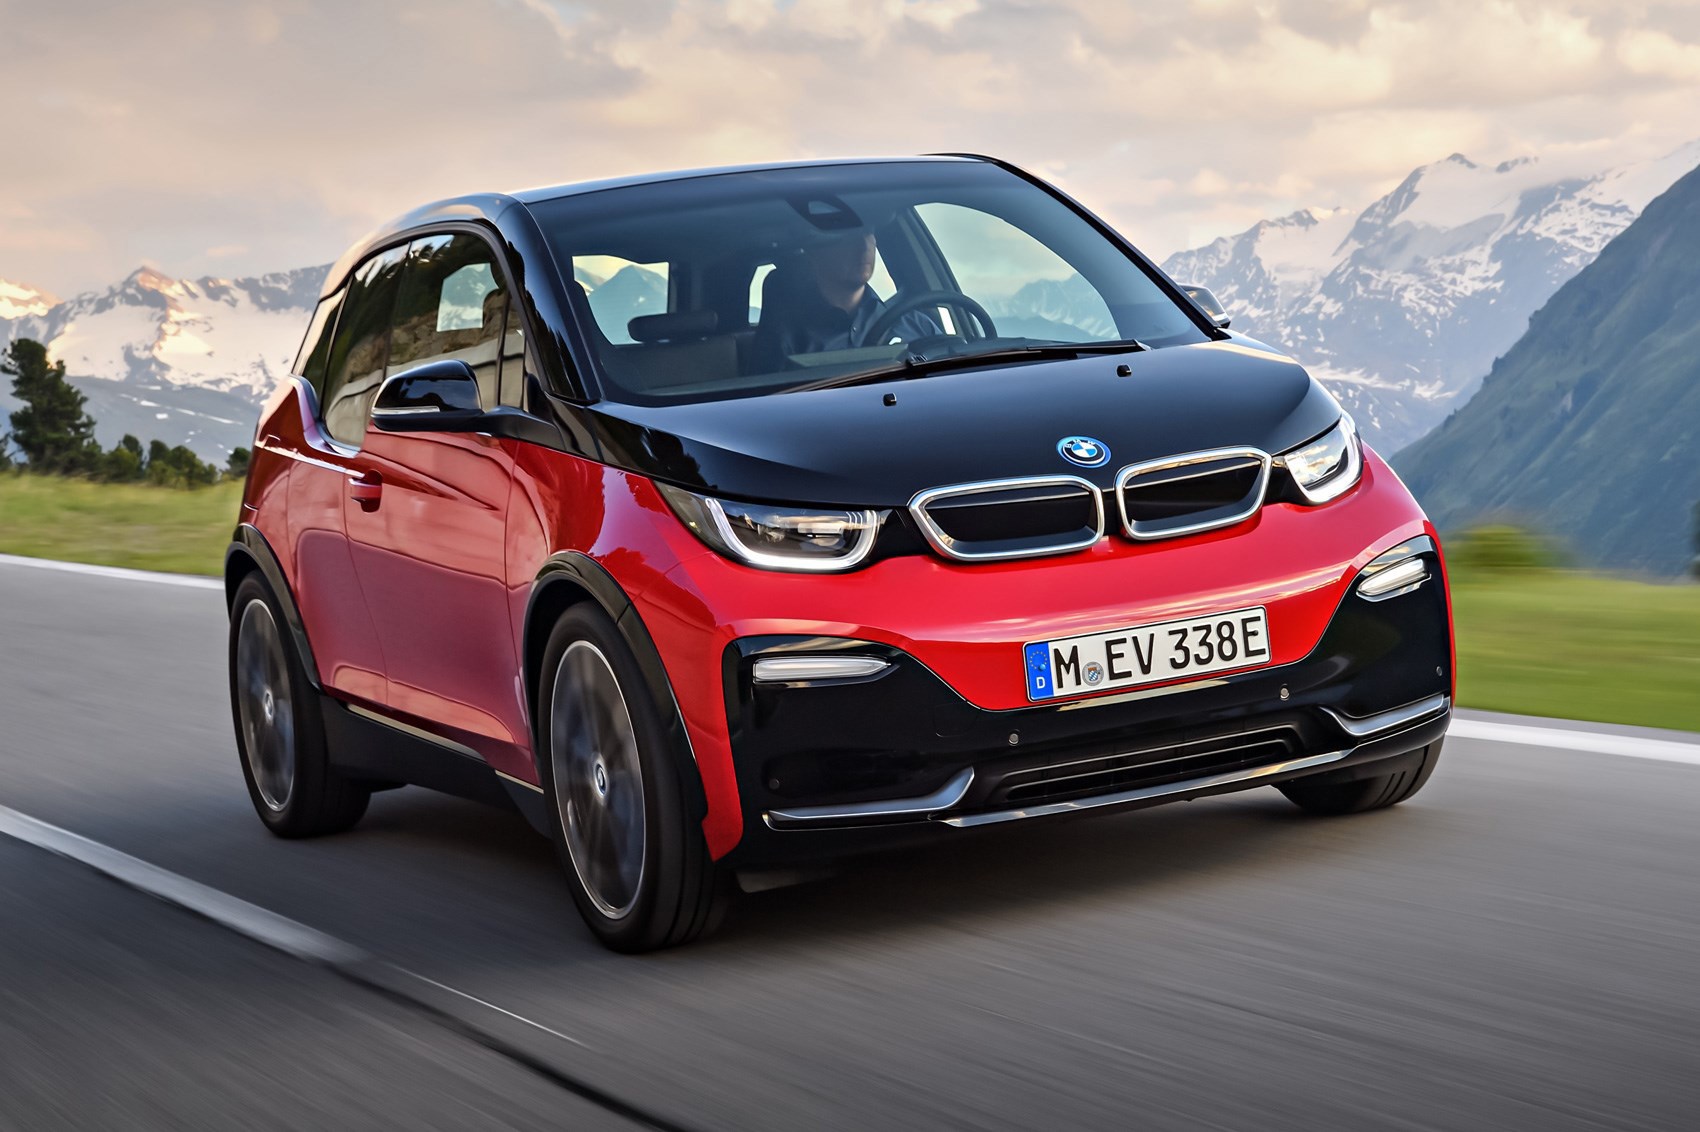 2018 BMW i3 unveiled with small design refresh and new sport